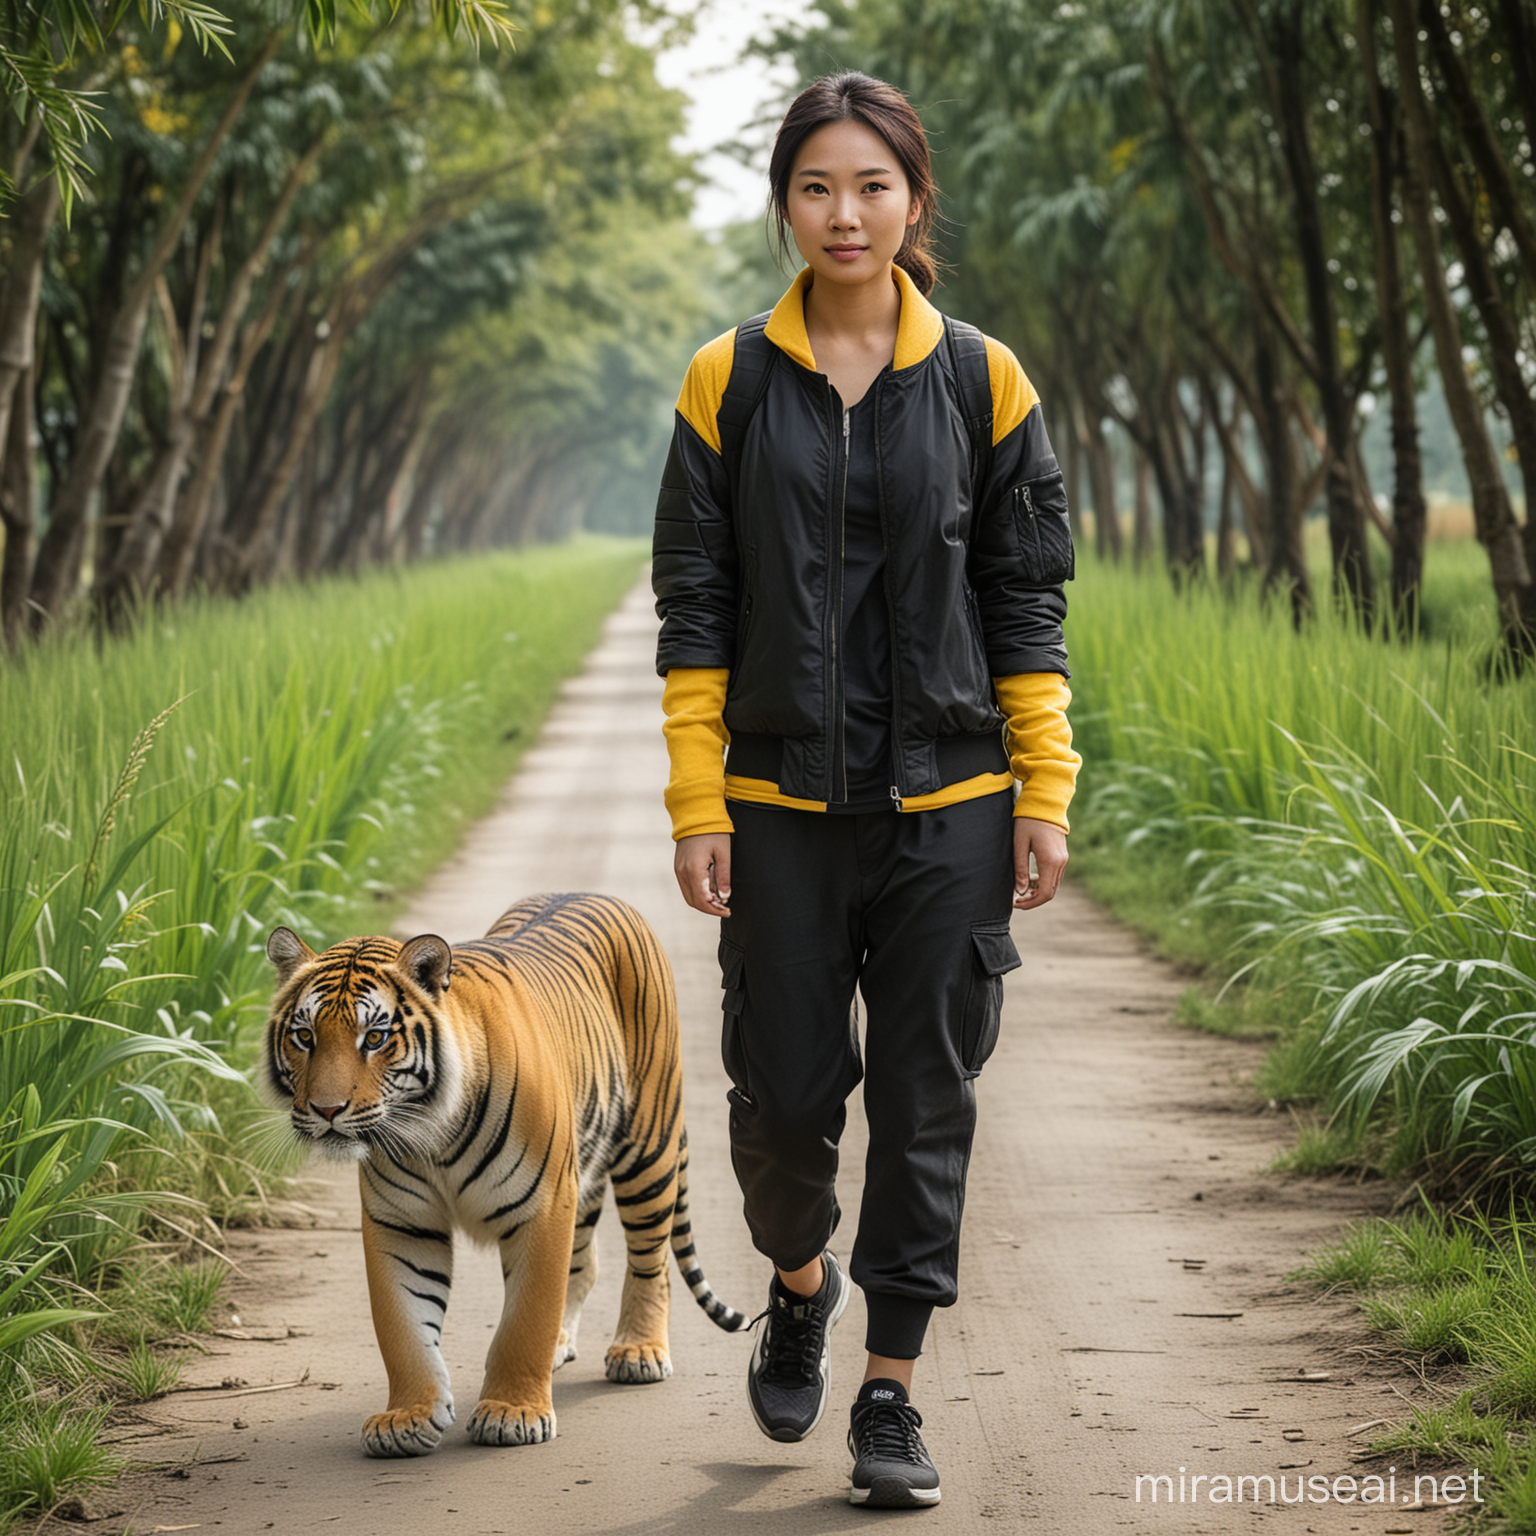 portrait of asian woman. The individual was wearing a black jacket with yellow sleeves, as well as black trousers and gray sneakers. He was walking with a fat tiger cub on a rice field road. , with clean fur and wide open eyes. The background consists of large trees and green plants.